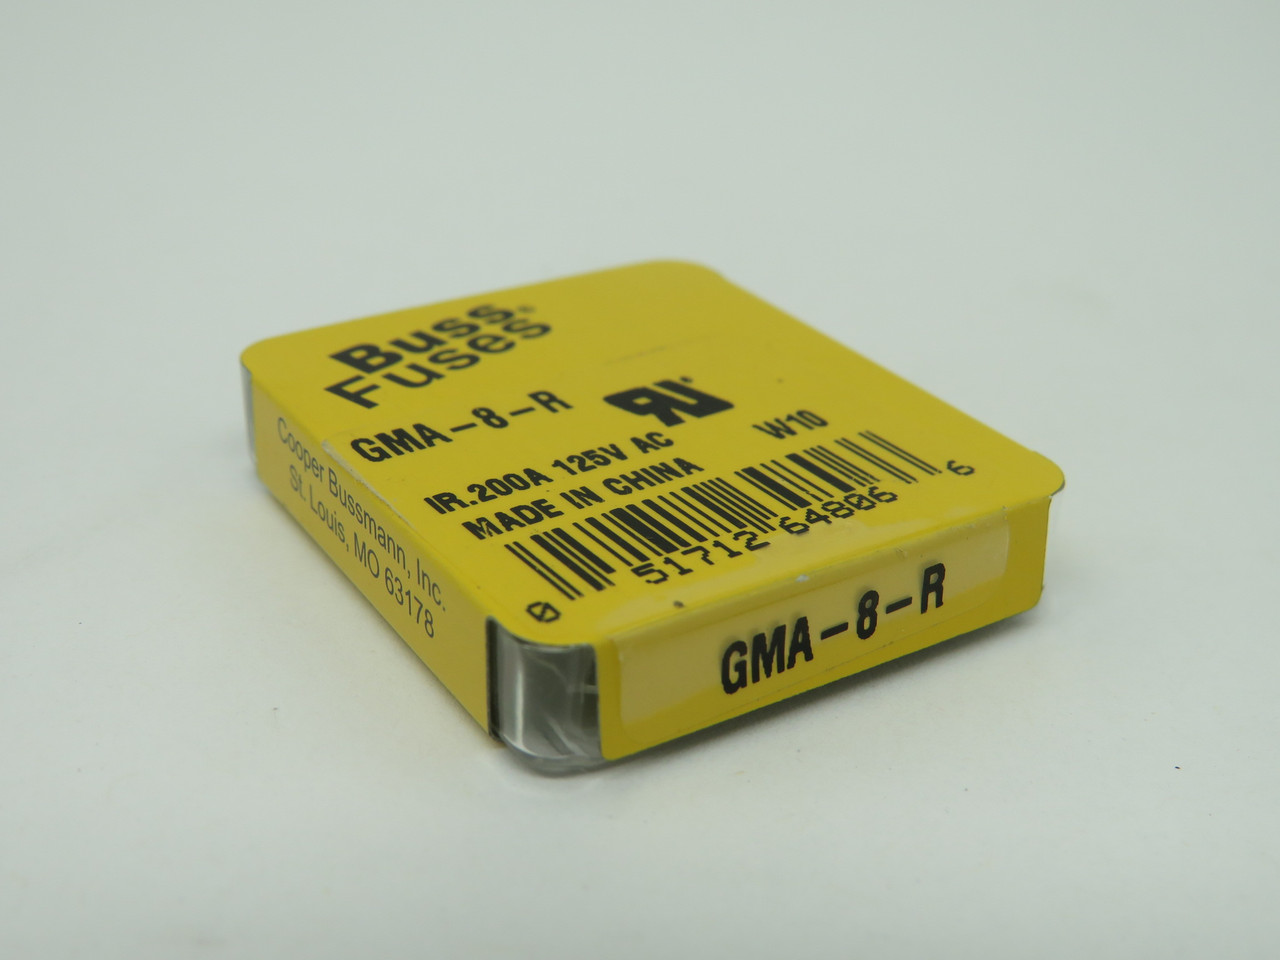 Cooper Bussmann GMA-8-R Fast-Acting Glass Fuse 8A 125V 5-Pack NEW